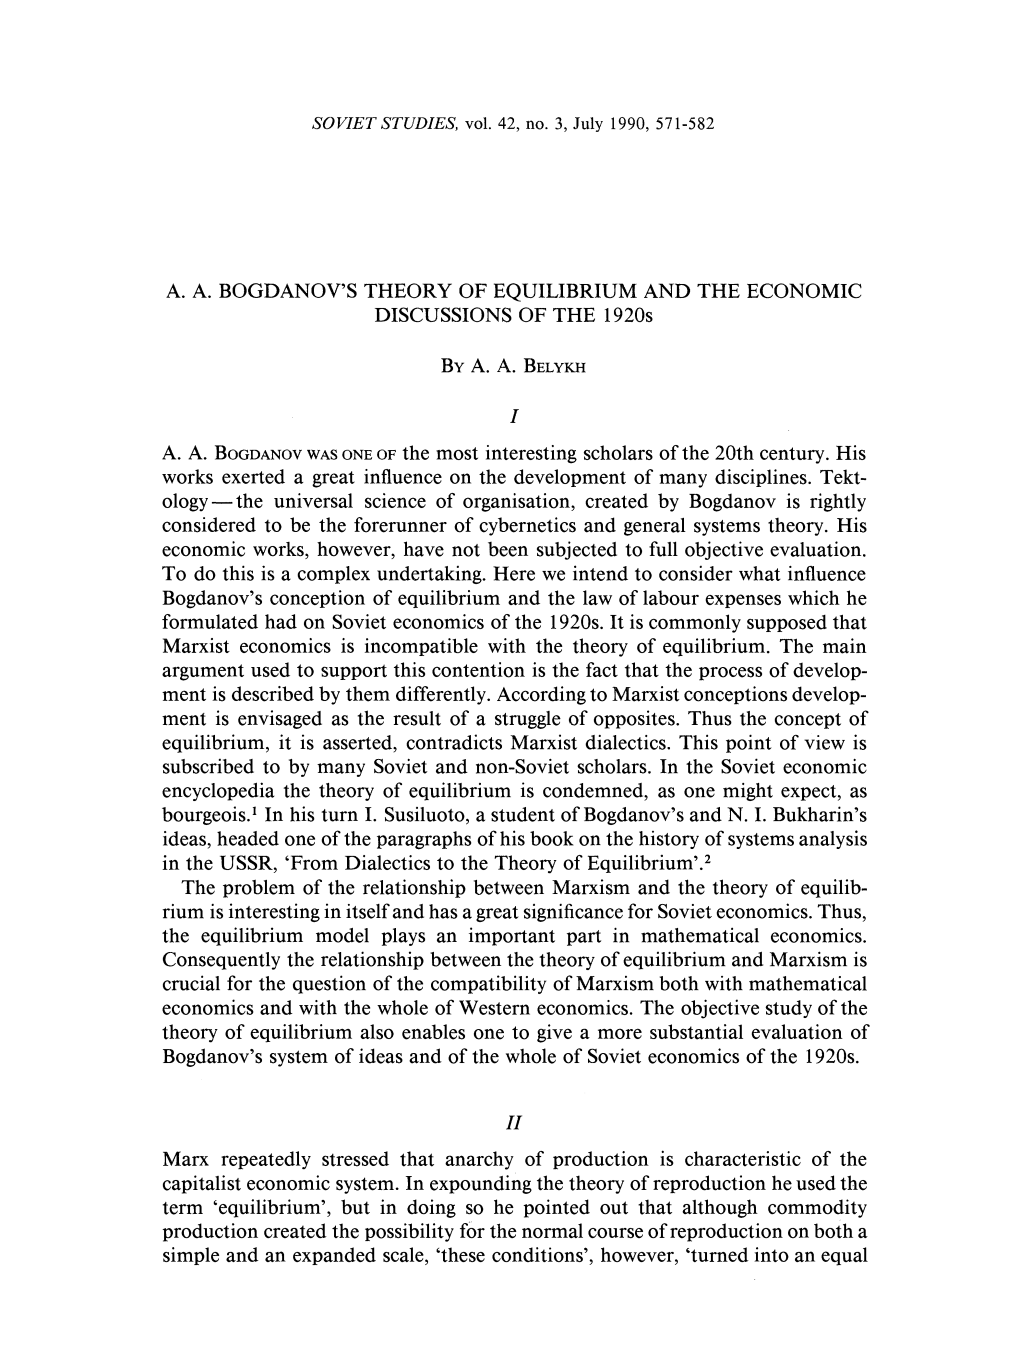 A. A. BOGDANOV's THEORY of EQUILIBRIUM and the ECONOMIC DISCUSSIONS of the 1920S